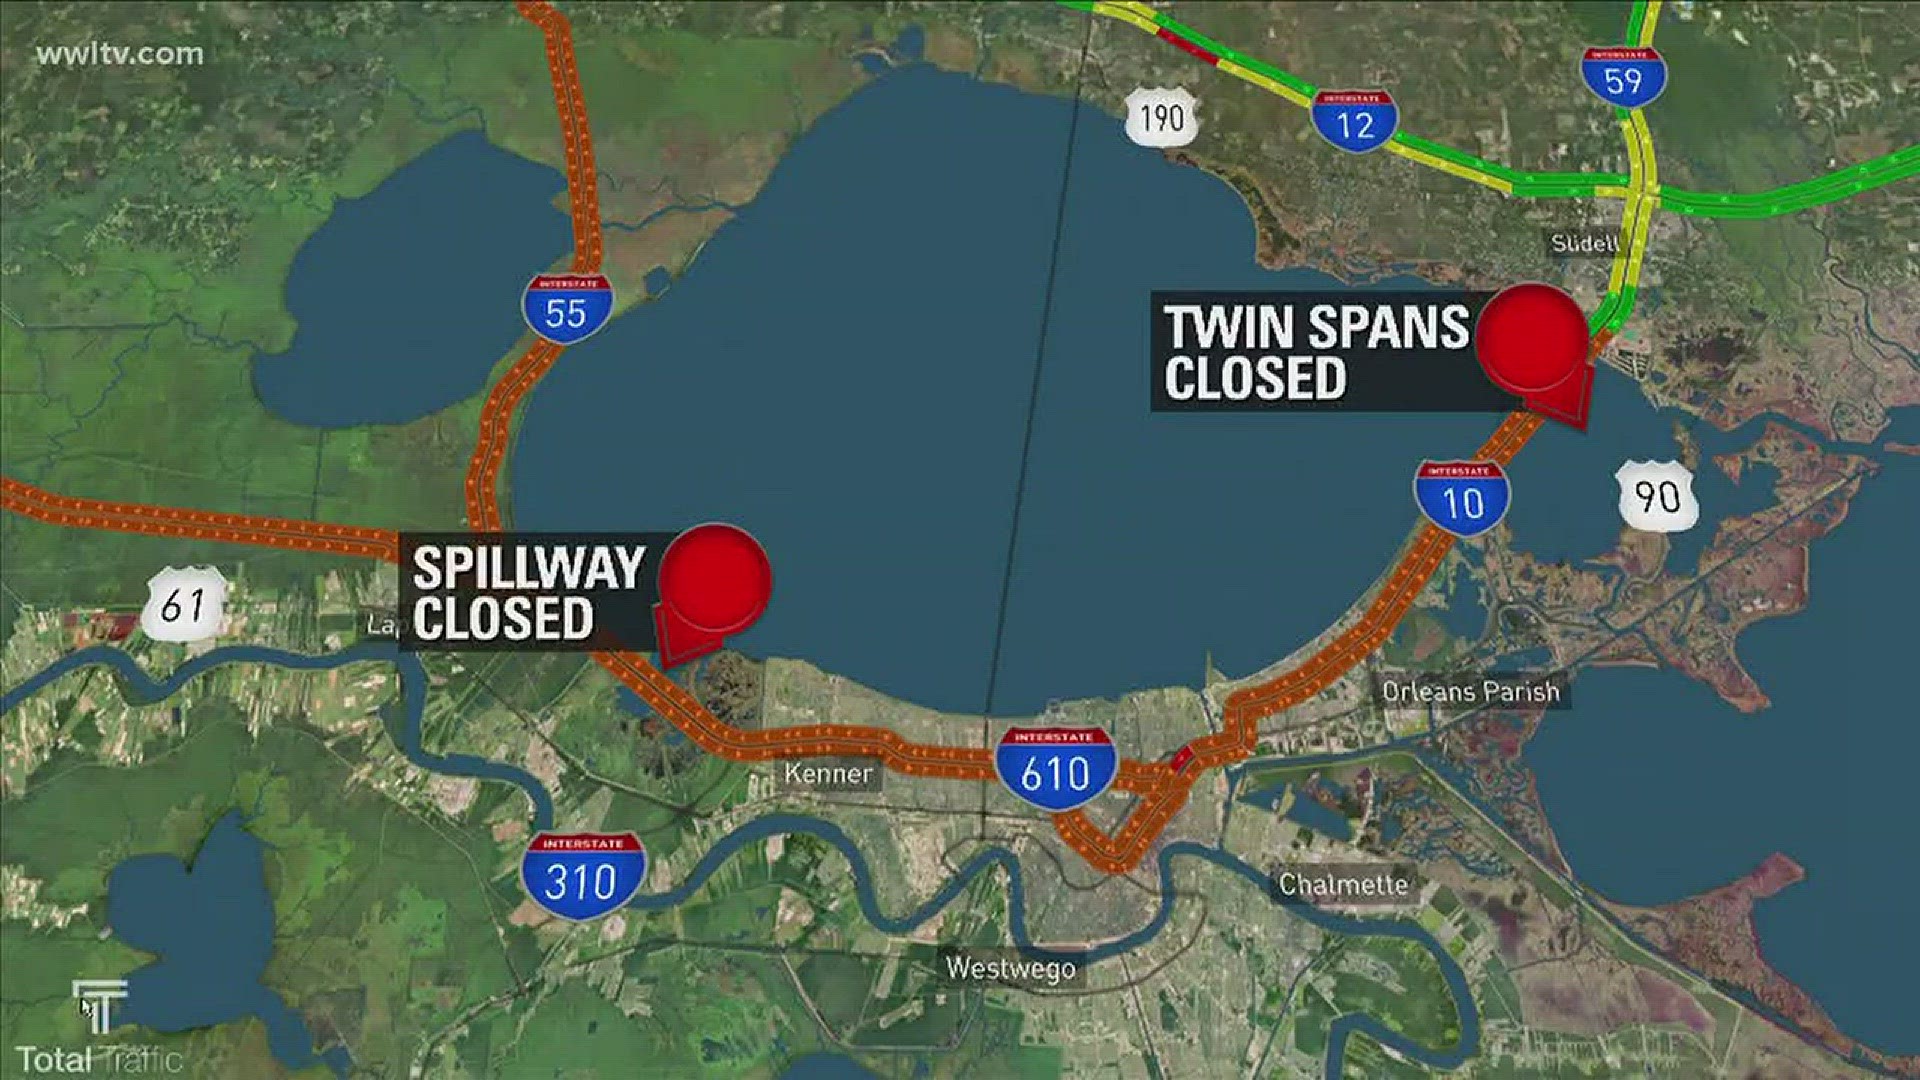 April Dupre has the update on all the major road closures in the metro area.